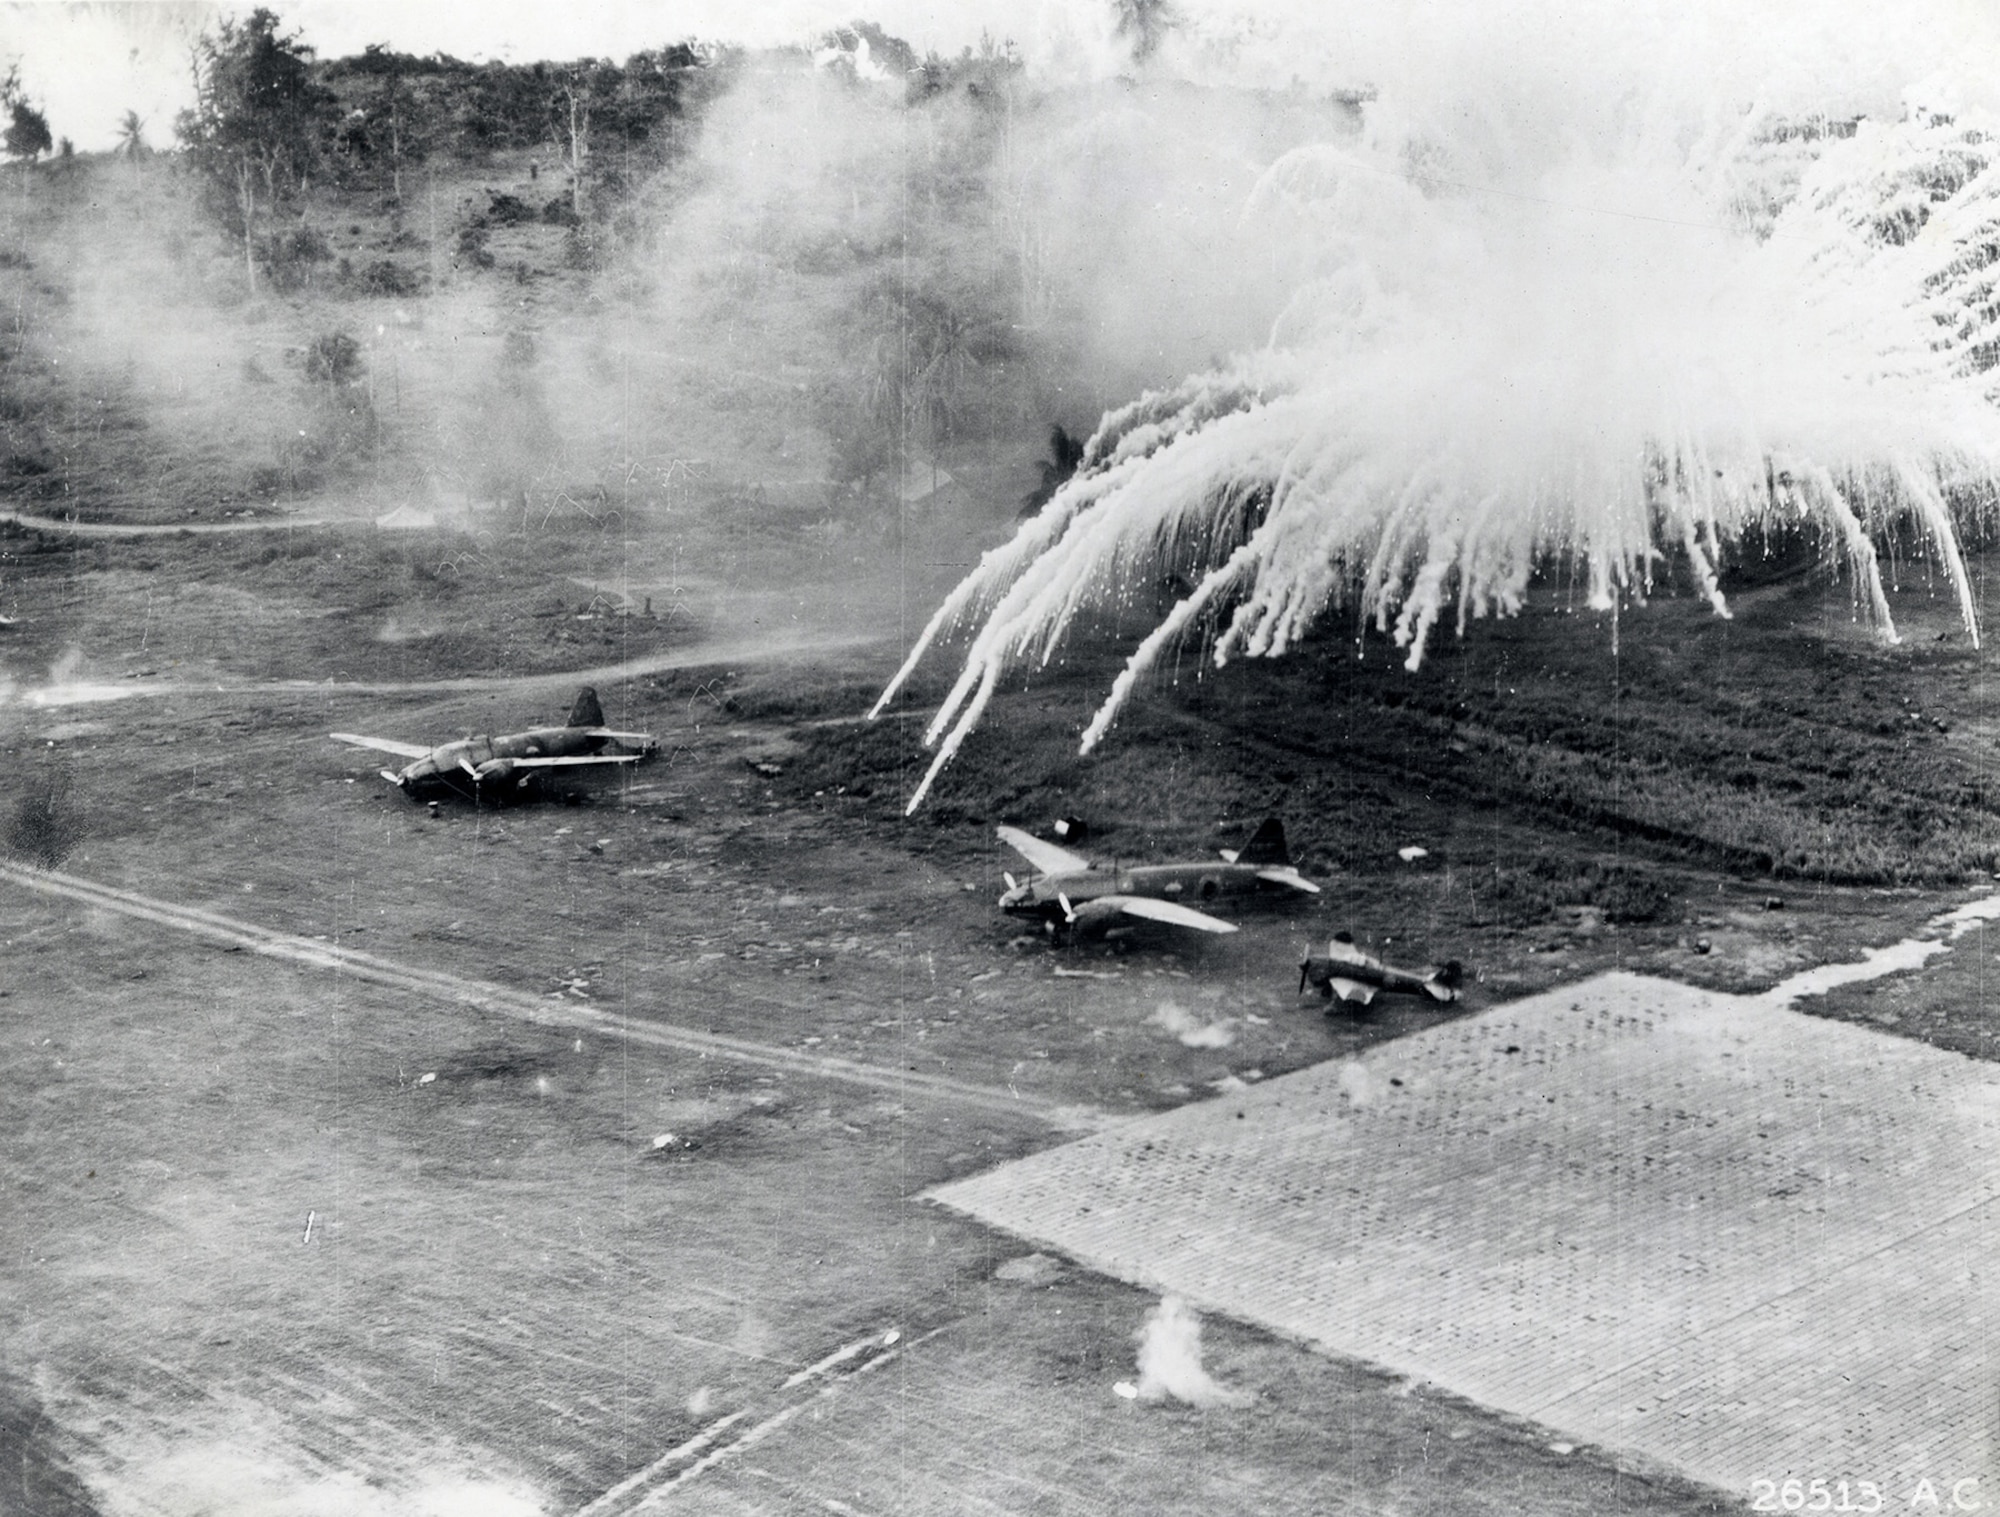 The result of phosphorus bombs and how they worked on a Betty and a Zeke on Lakunai Field during the attack at Rabaul. (U.S. Air Force photo)